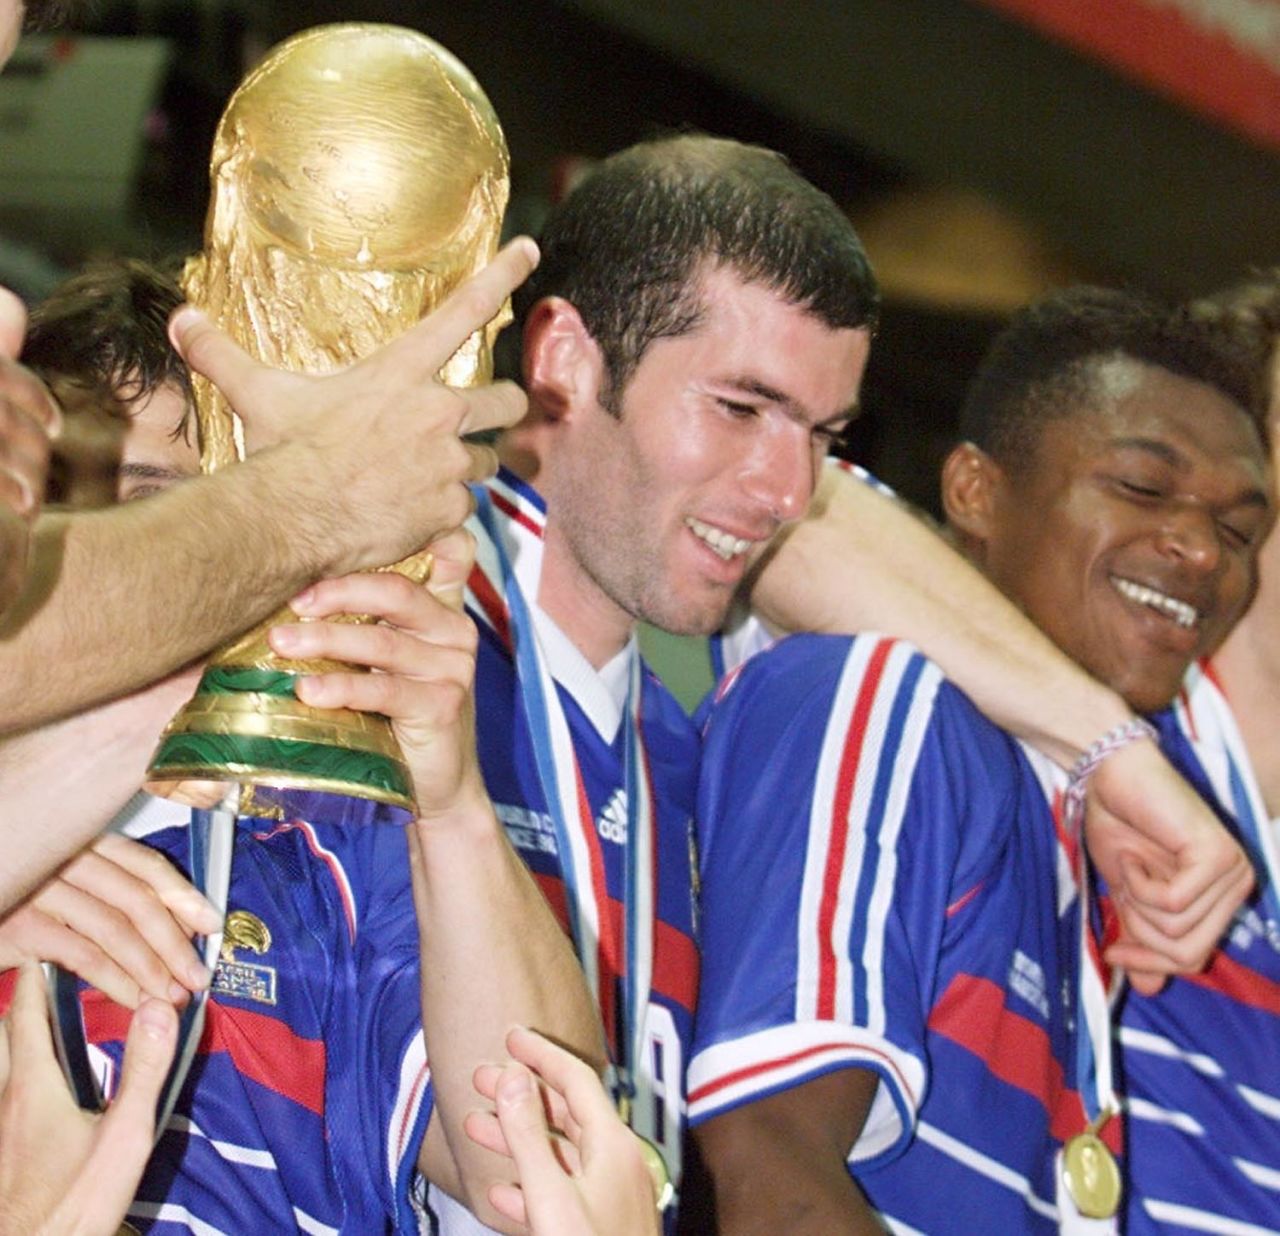 Eight years earlier, he inspired France to a World Cup triumph on home soil. In the final against Brazil, Zidane scored two first-half goals as France ran out 3-0 winners.